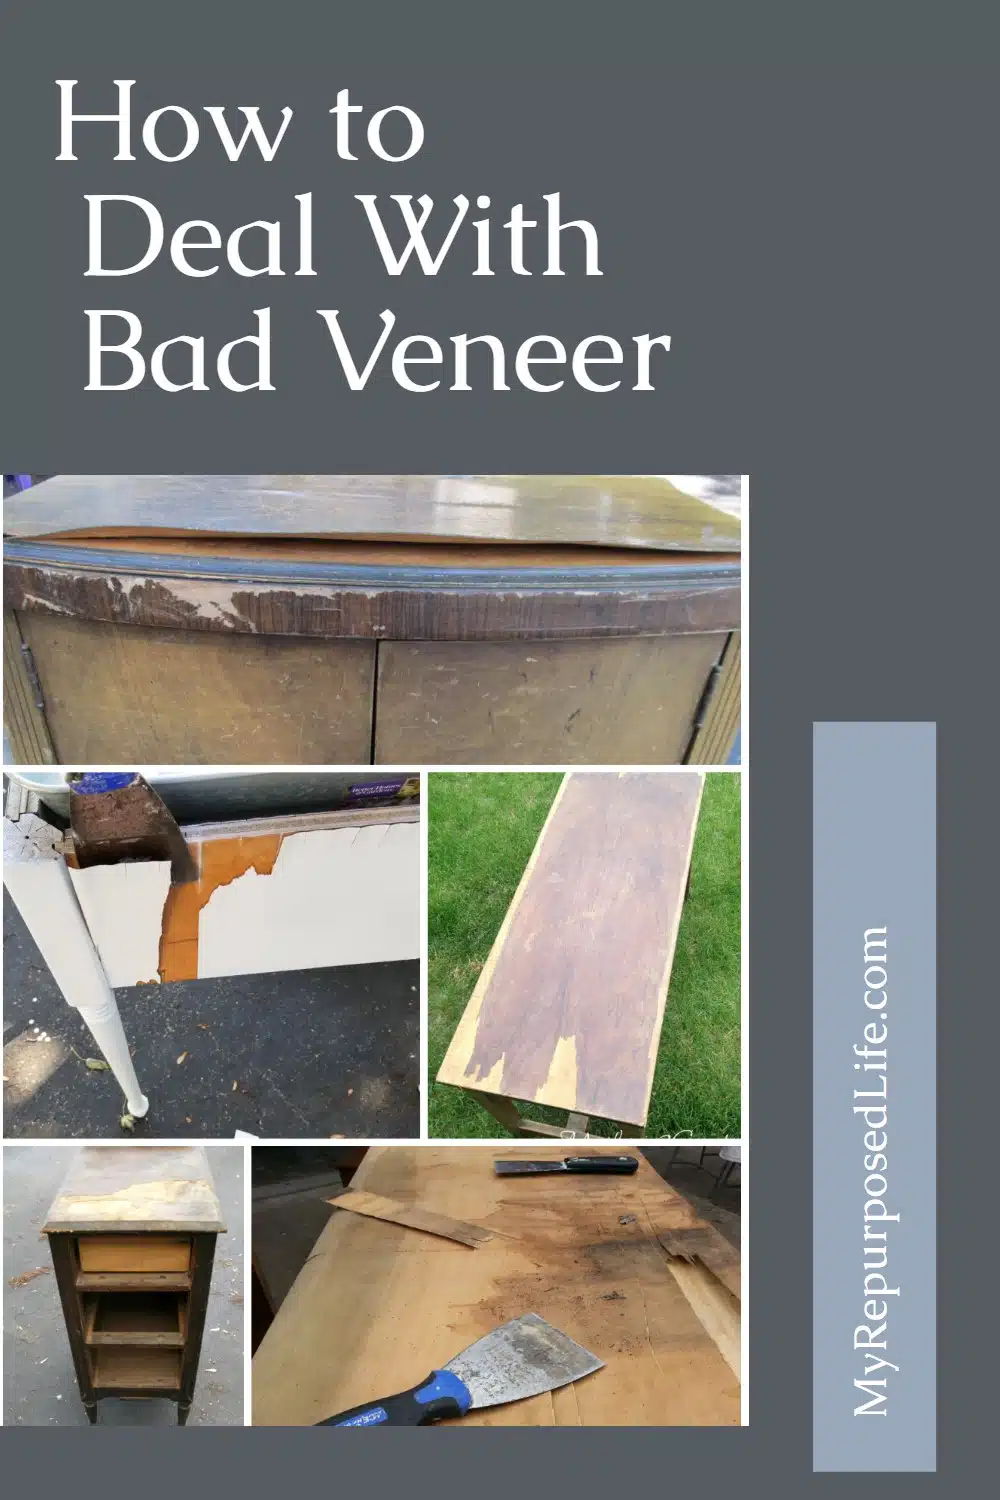 Are you a furniture flipper? Do you struggle with how to handle wood veneer problems? I have answers for you, tips, ideas, and more. After 13 years of working on free, cheap, and damaged furniture, I've seen it all! #MyRepurposedLife #woodveneer #furniture via @repurposedlife